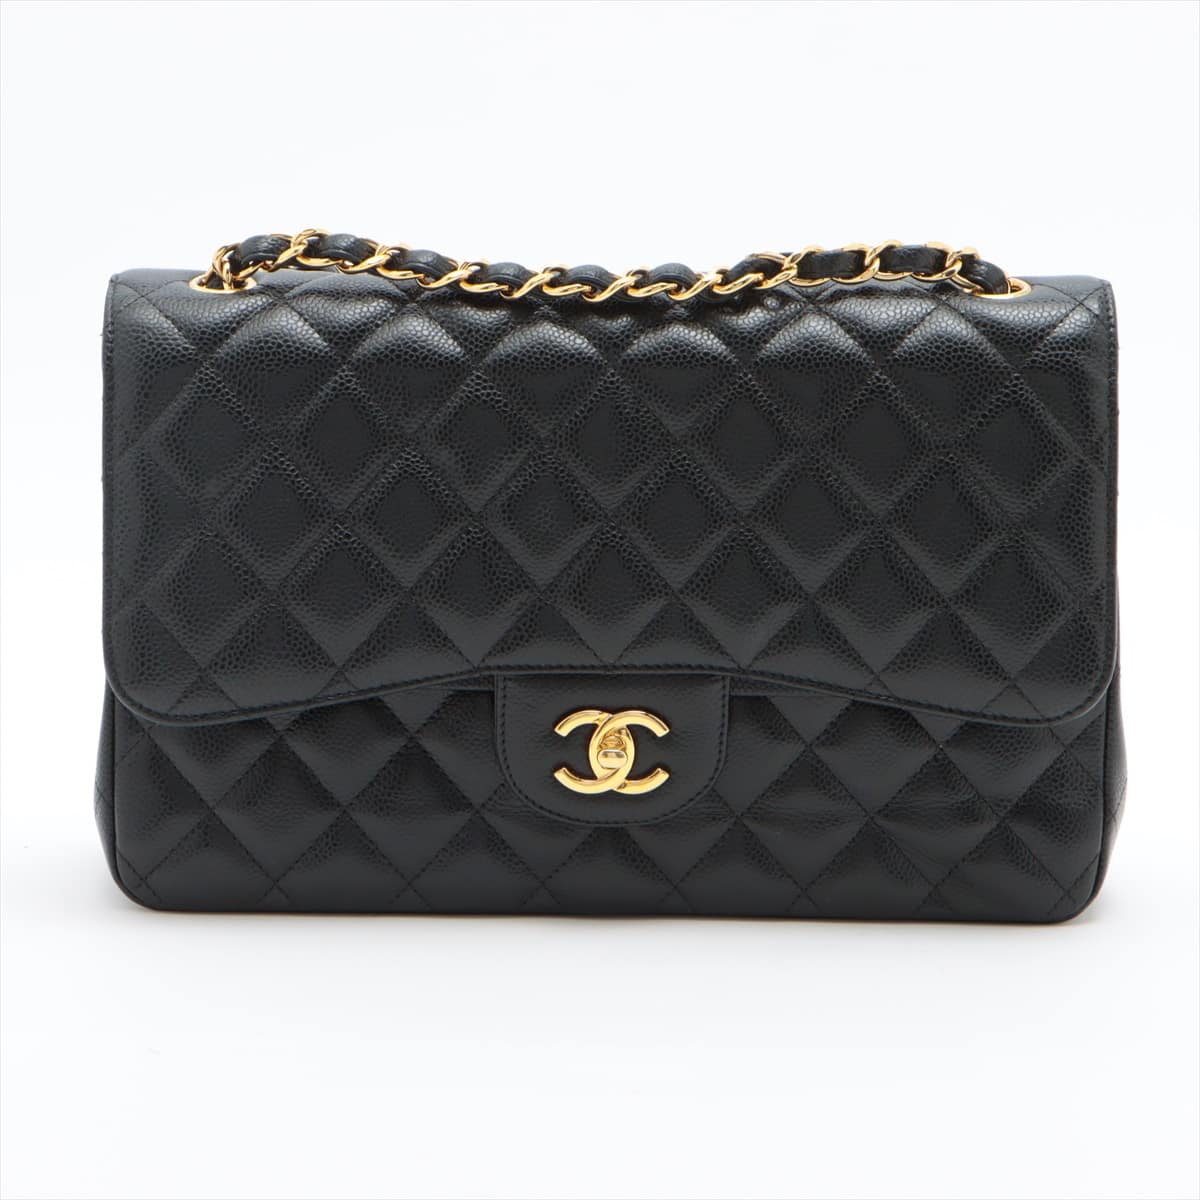 Chanel Big Matelasse Caviarskin Double flap Double chain bag Black Gold Metal fittings 29th